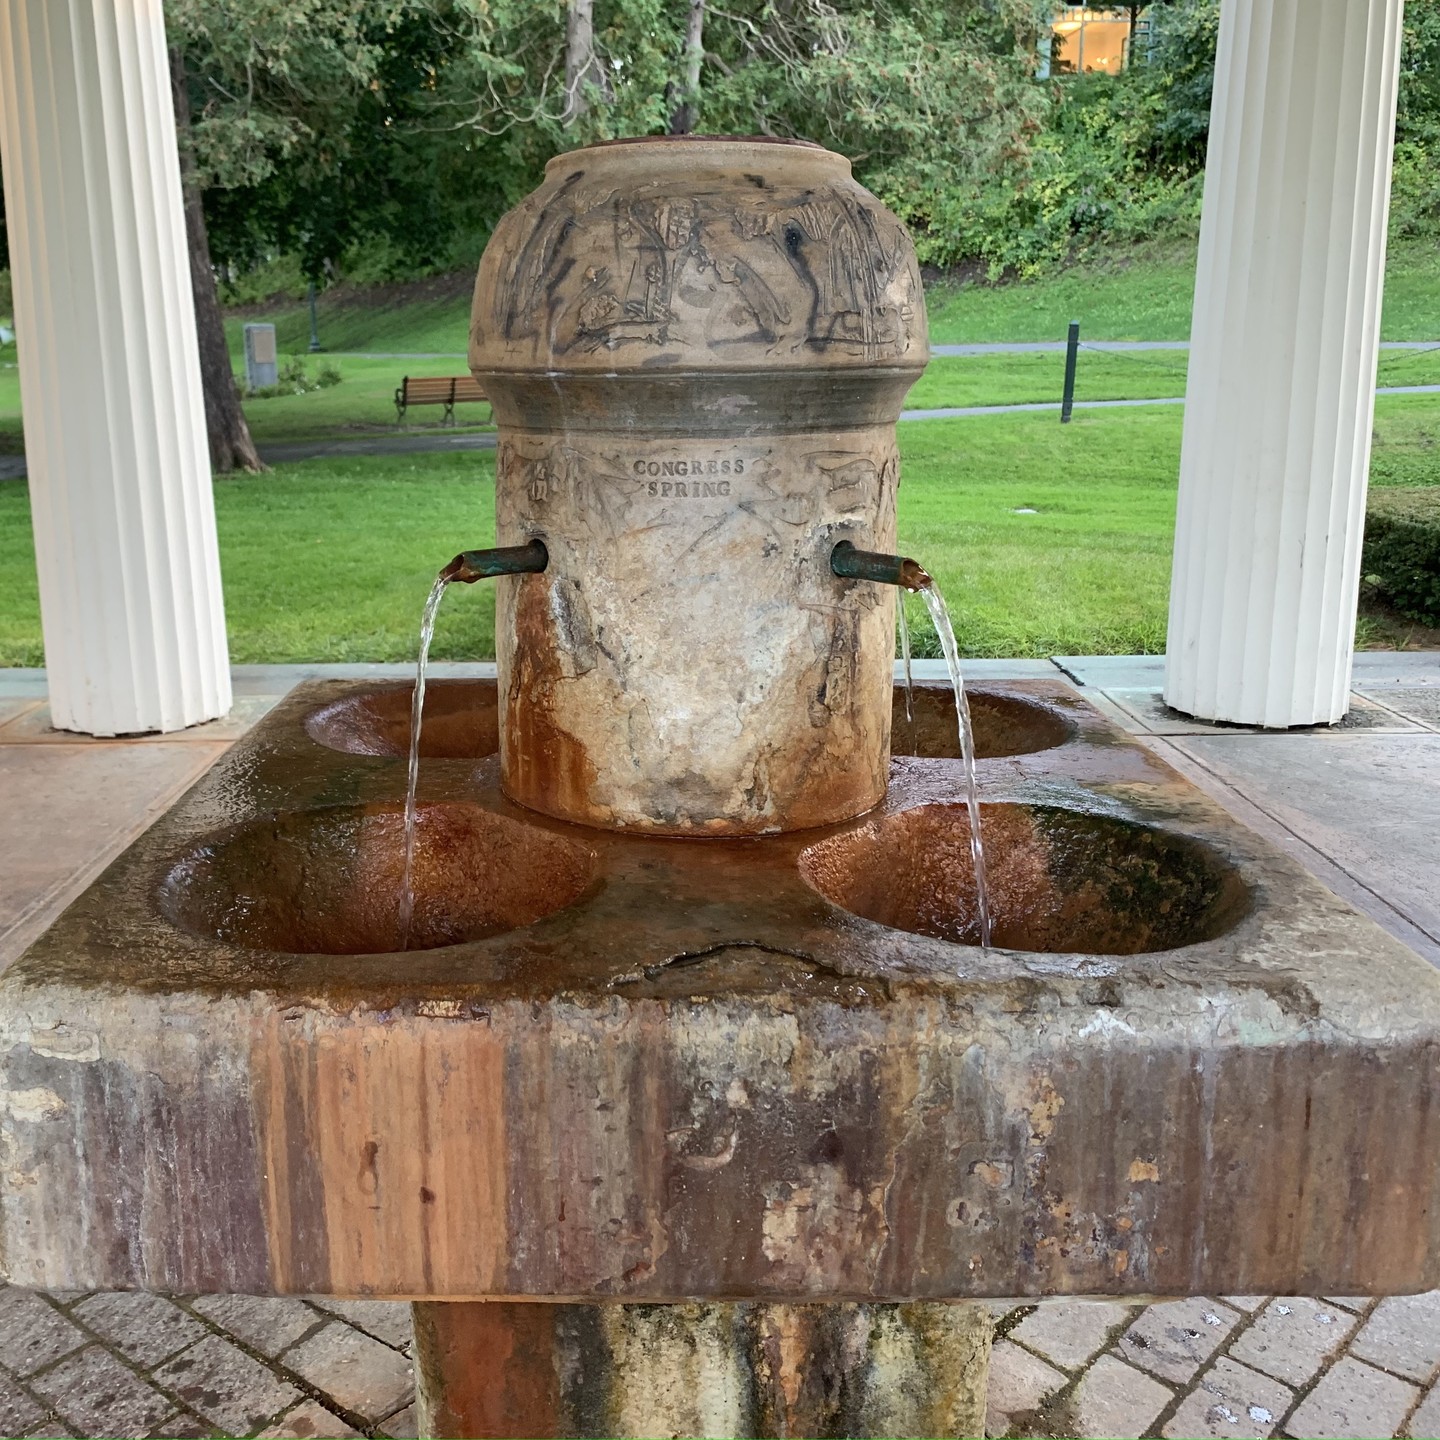 The mineral springs in Congress Park in Saratoga Springs, NY was once a source of bottled water that was shipped worldwide. The springs received their name because the springs were visited by members of the newly established Congress in 1792.